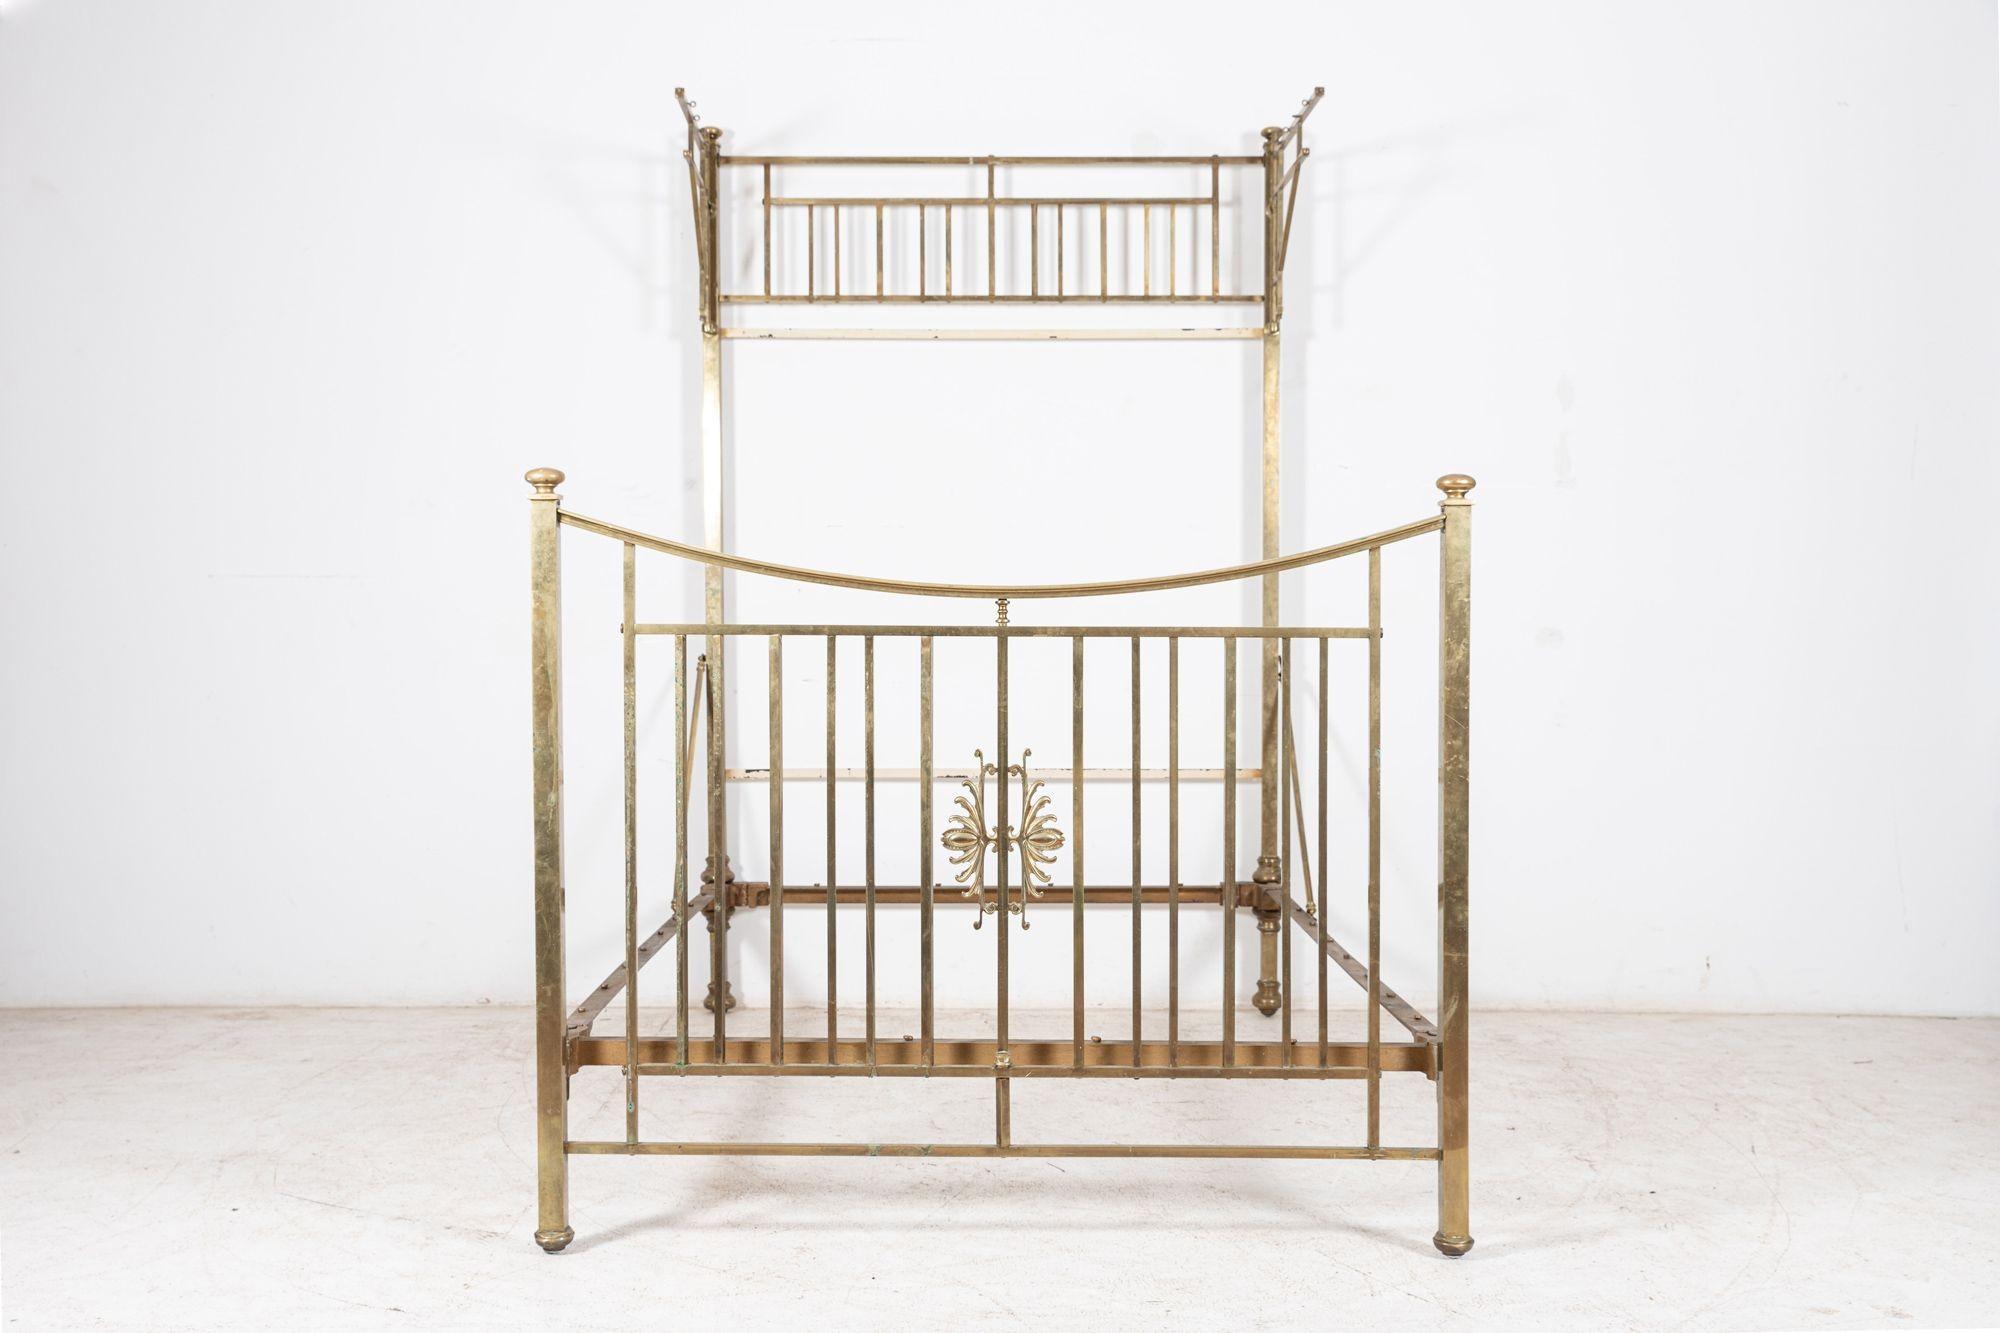 Circa 1890

19thC English half tester double brass bed frame with lattice swing brackets to the sides and twin bars below for hanging fabric. Very high quality casting.

Measures: W 206 x D 140 x H 209 cm

Inside frame W 199 x D 136 x H 209